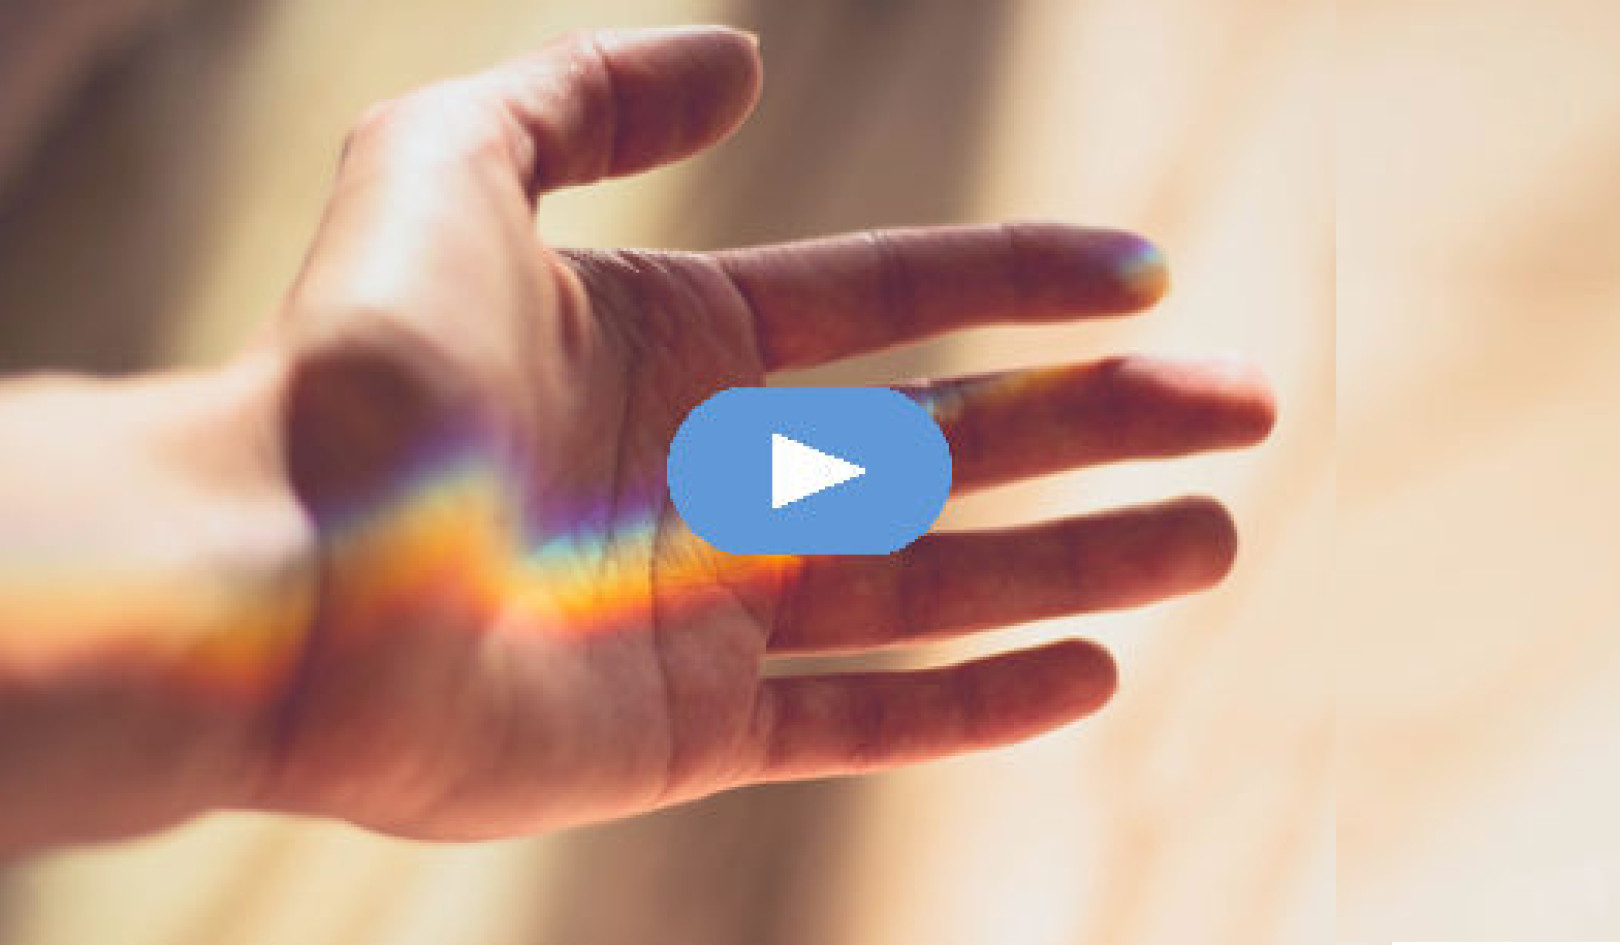 Finding Silver Linings and Rainbows (Video)